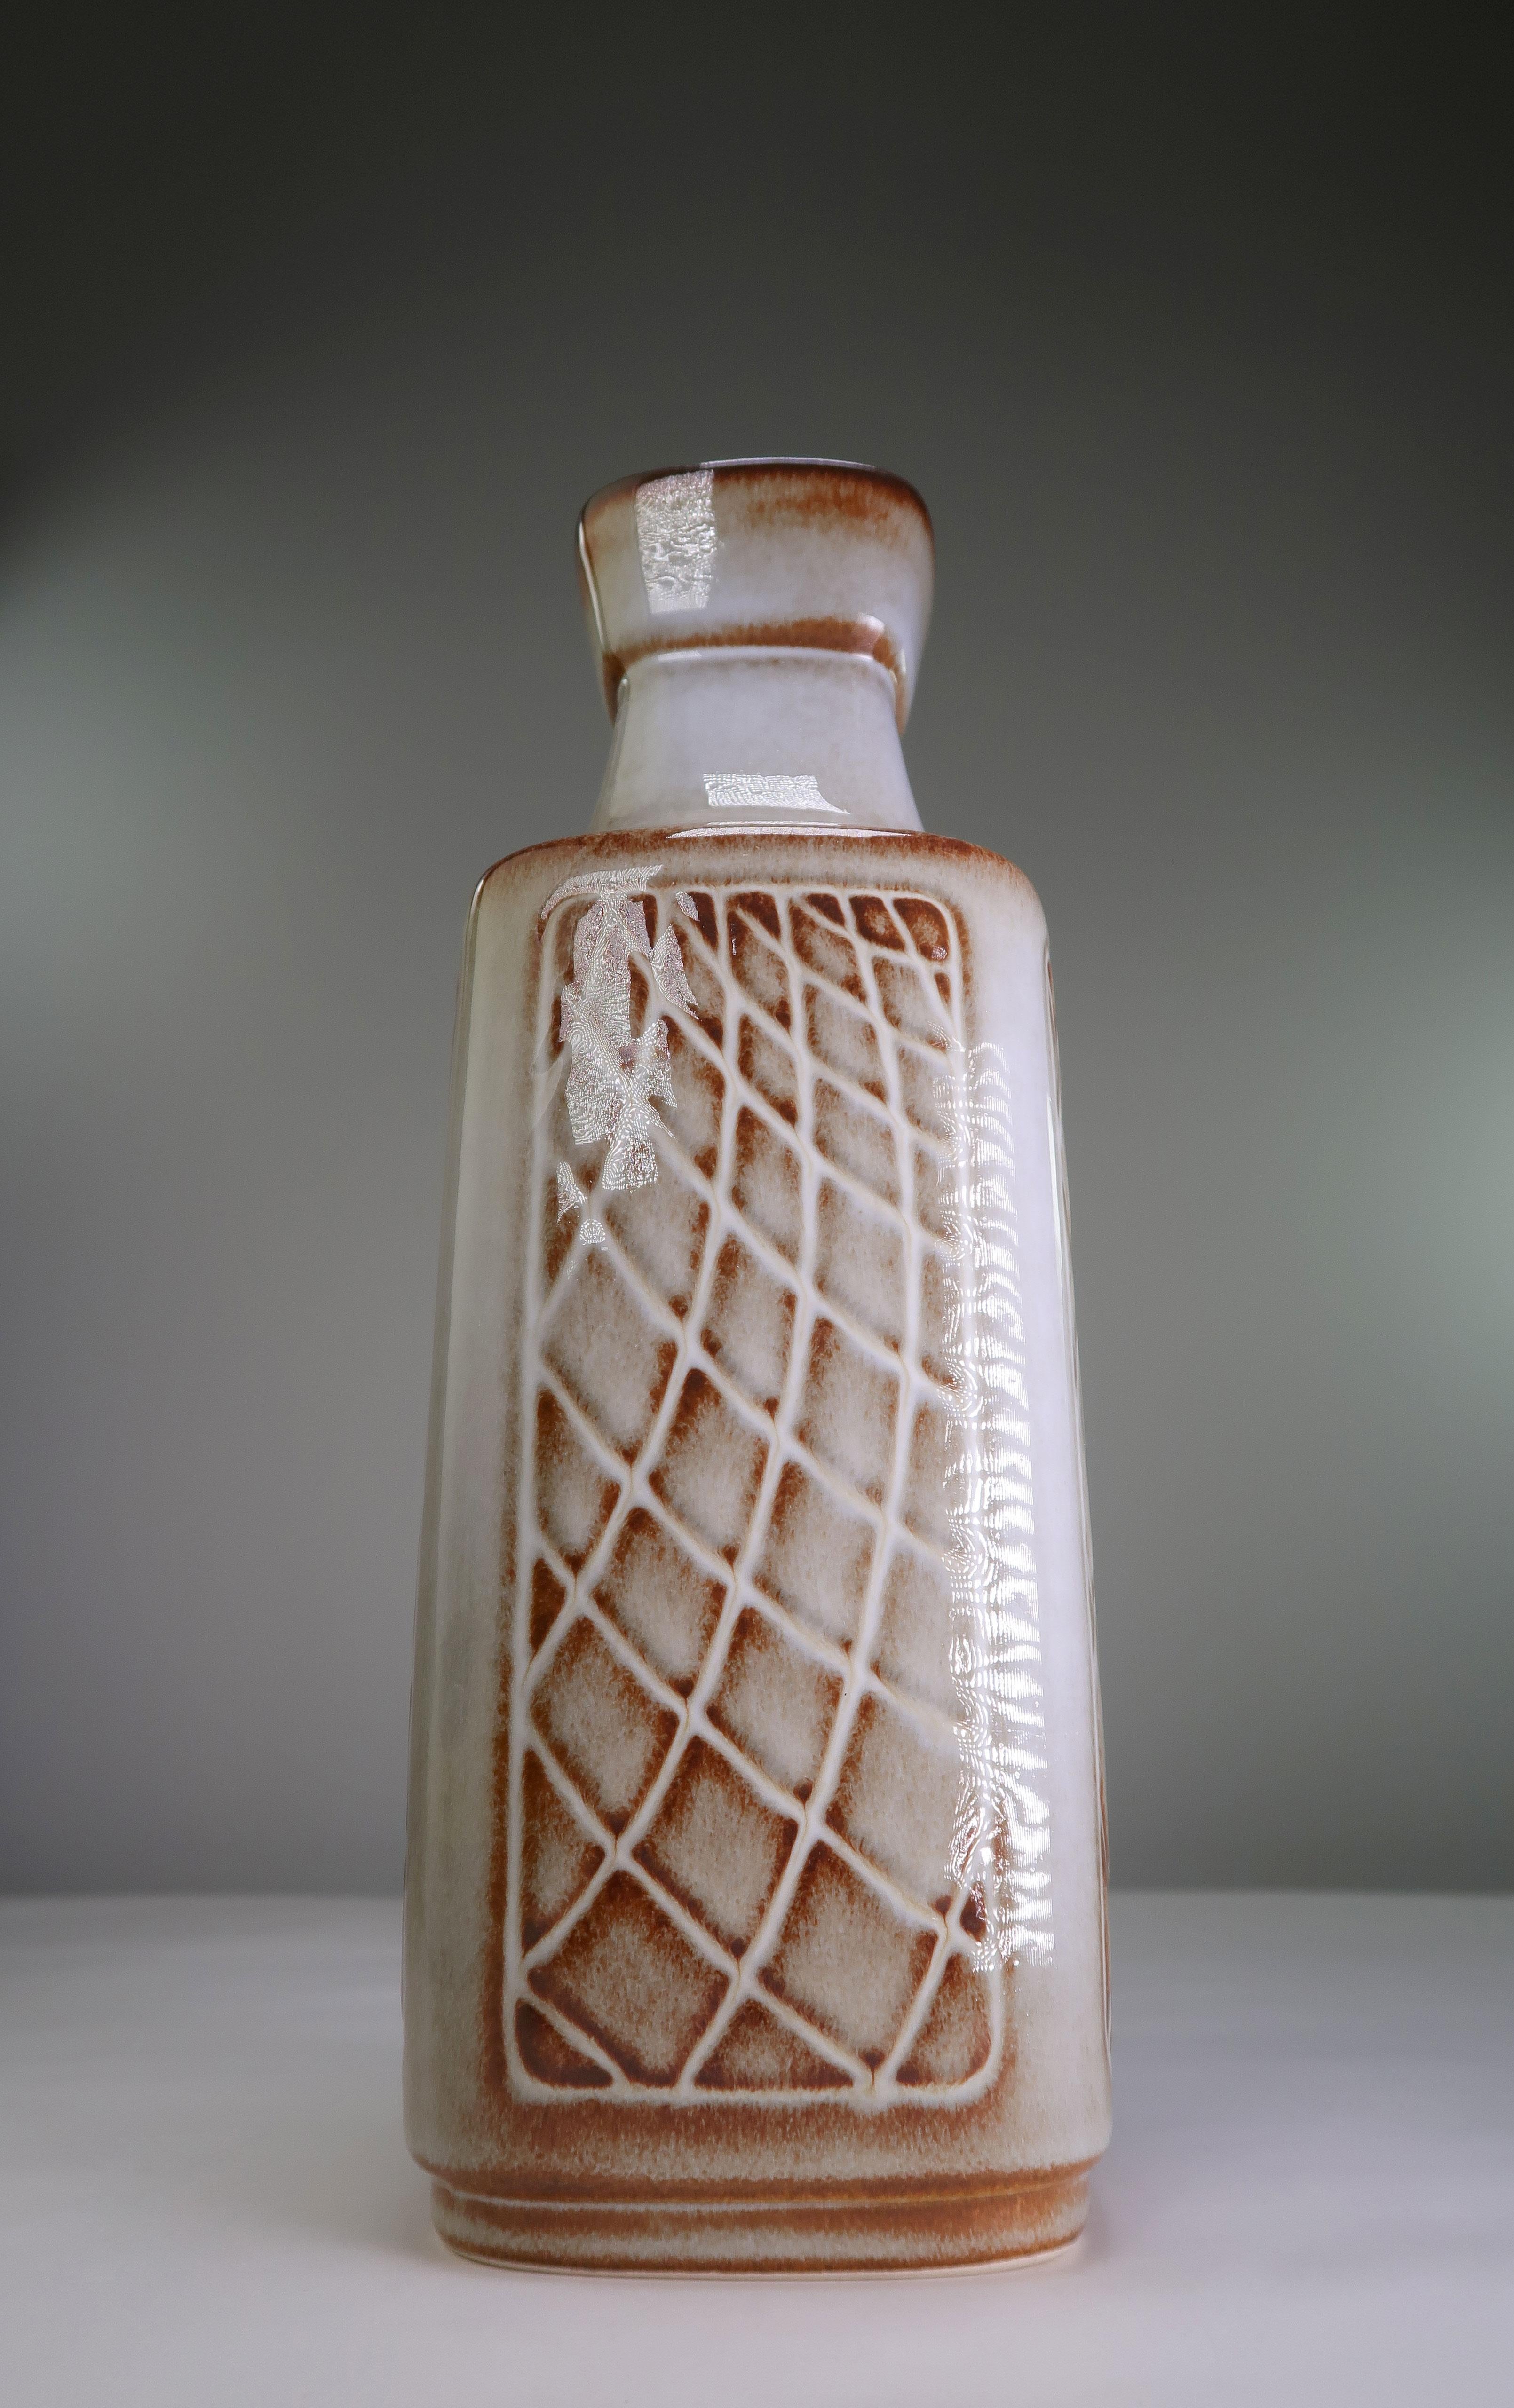 Danish Mid-Century Modern handmade and hand decorated stoneware vase by designer Einar Johansen. Grey base with brown lines accentuating the geometric pattern on all four sides. Manufactured by Soholm Pottery on the Danish island of Bornholm in the